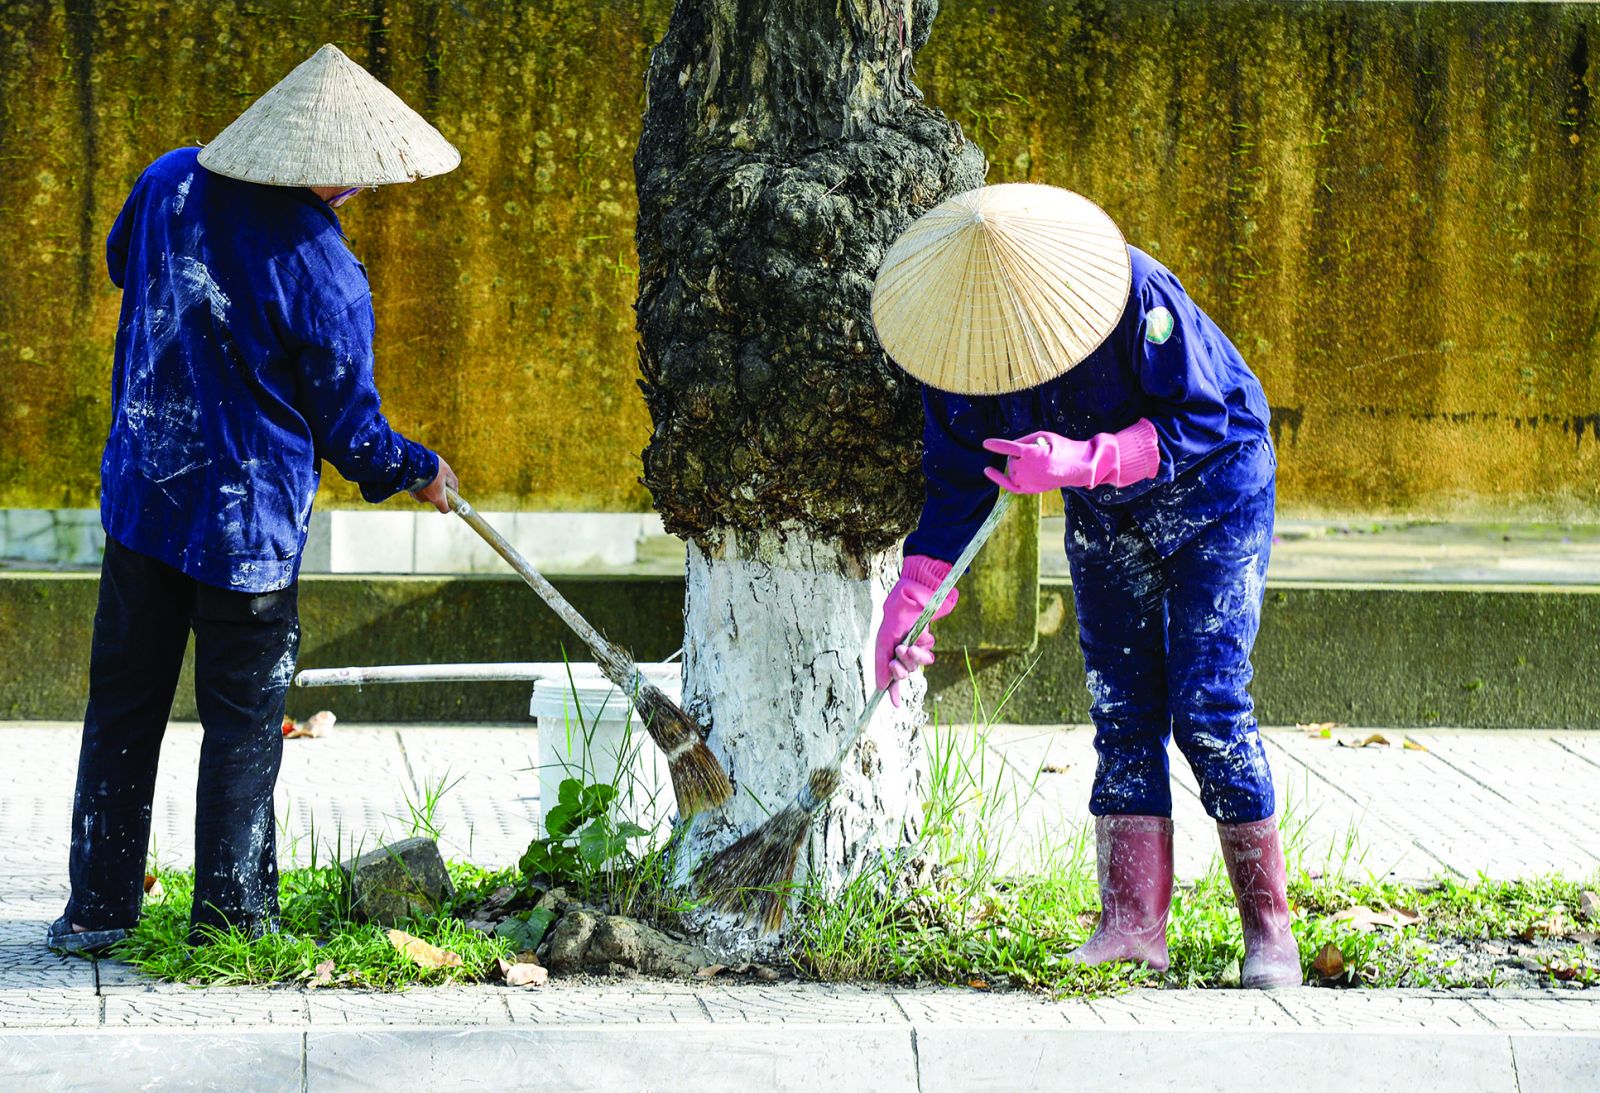 In the days leading up to Tet, workers gather to whitewash the foot of the trees on the streets